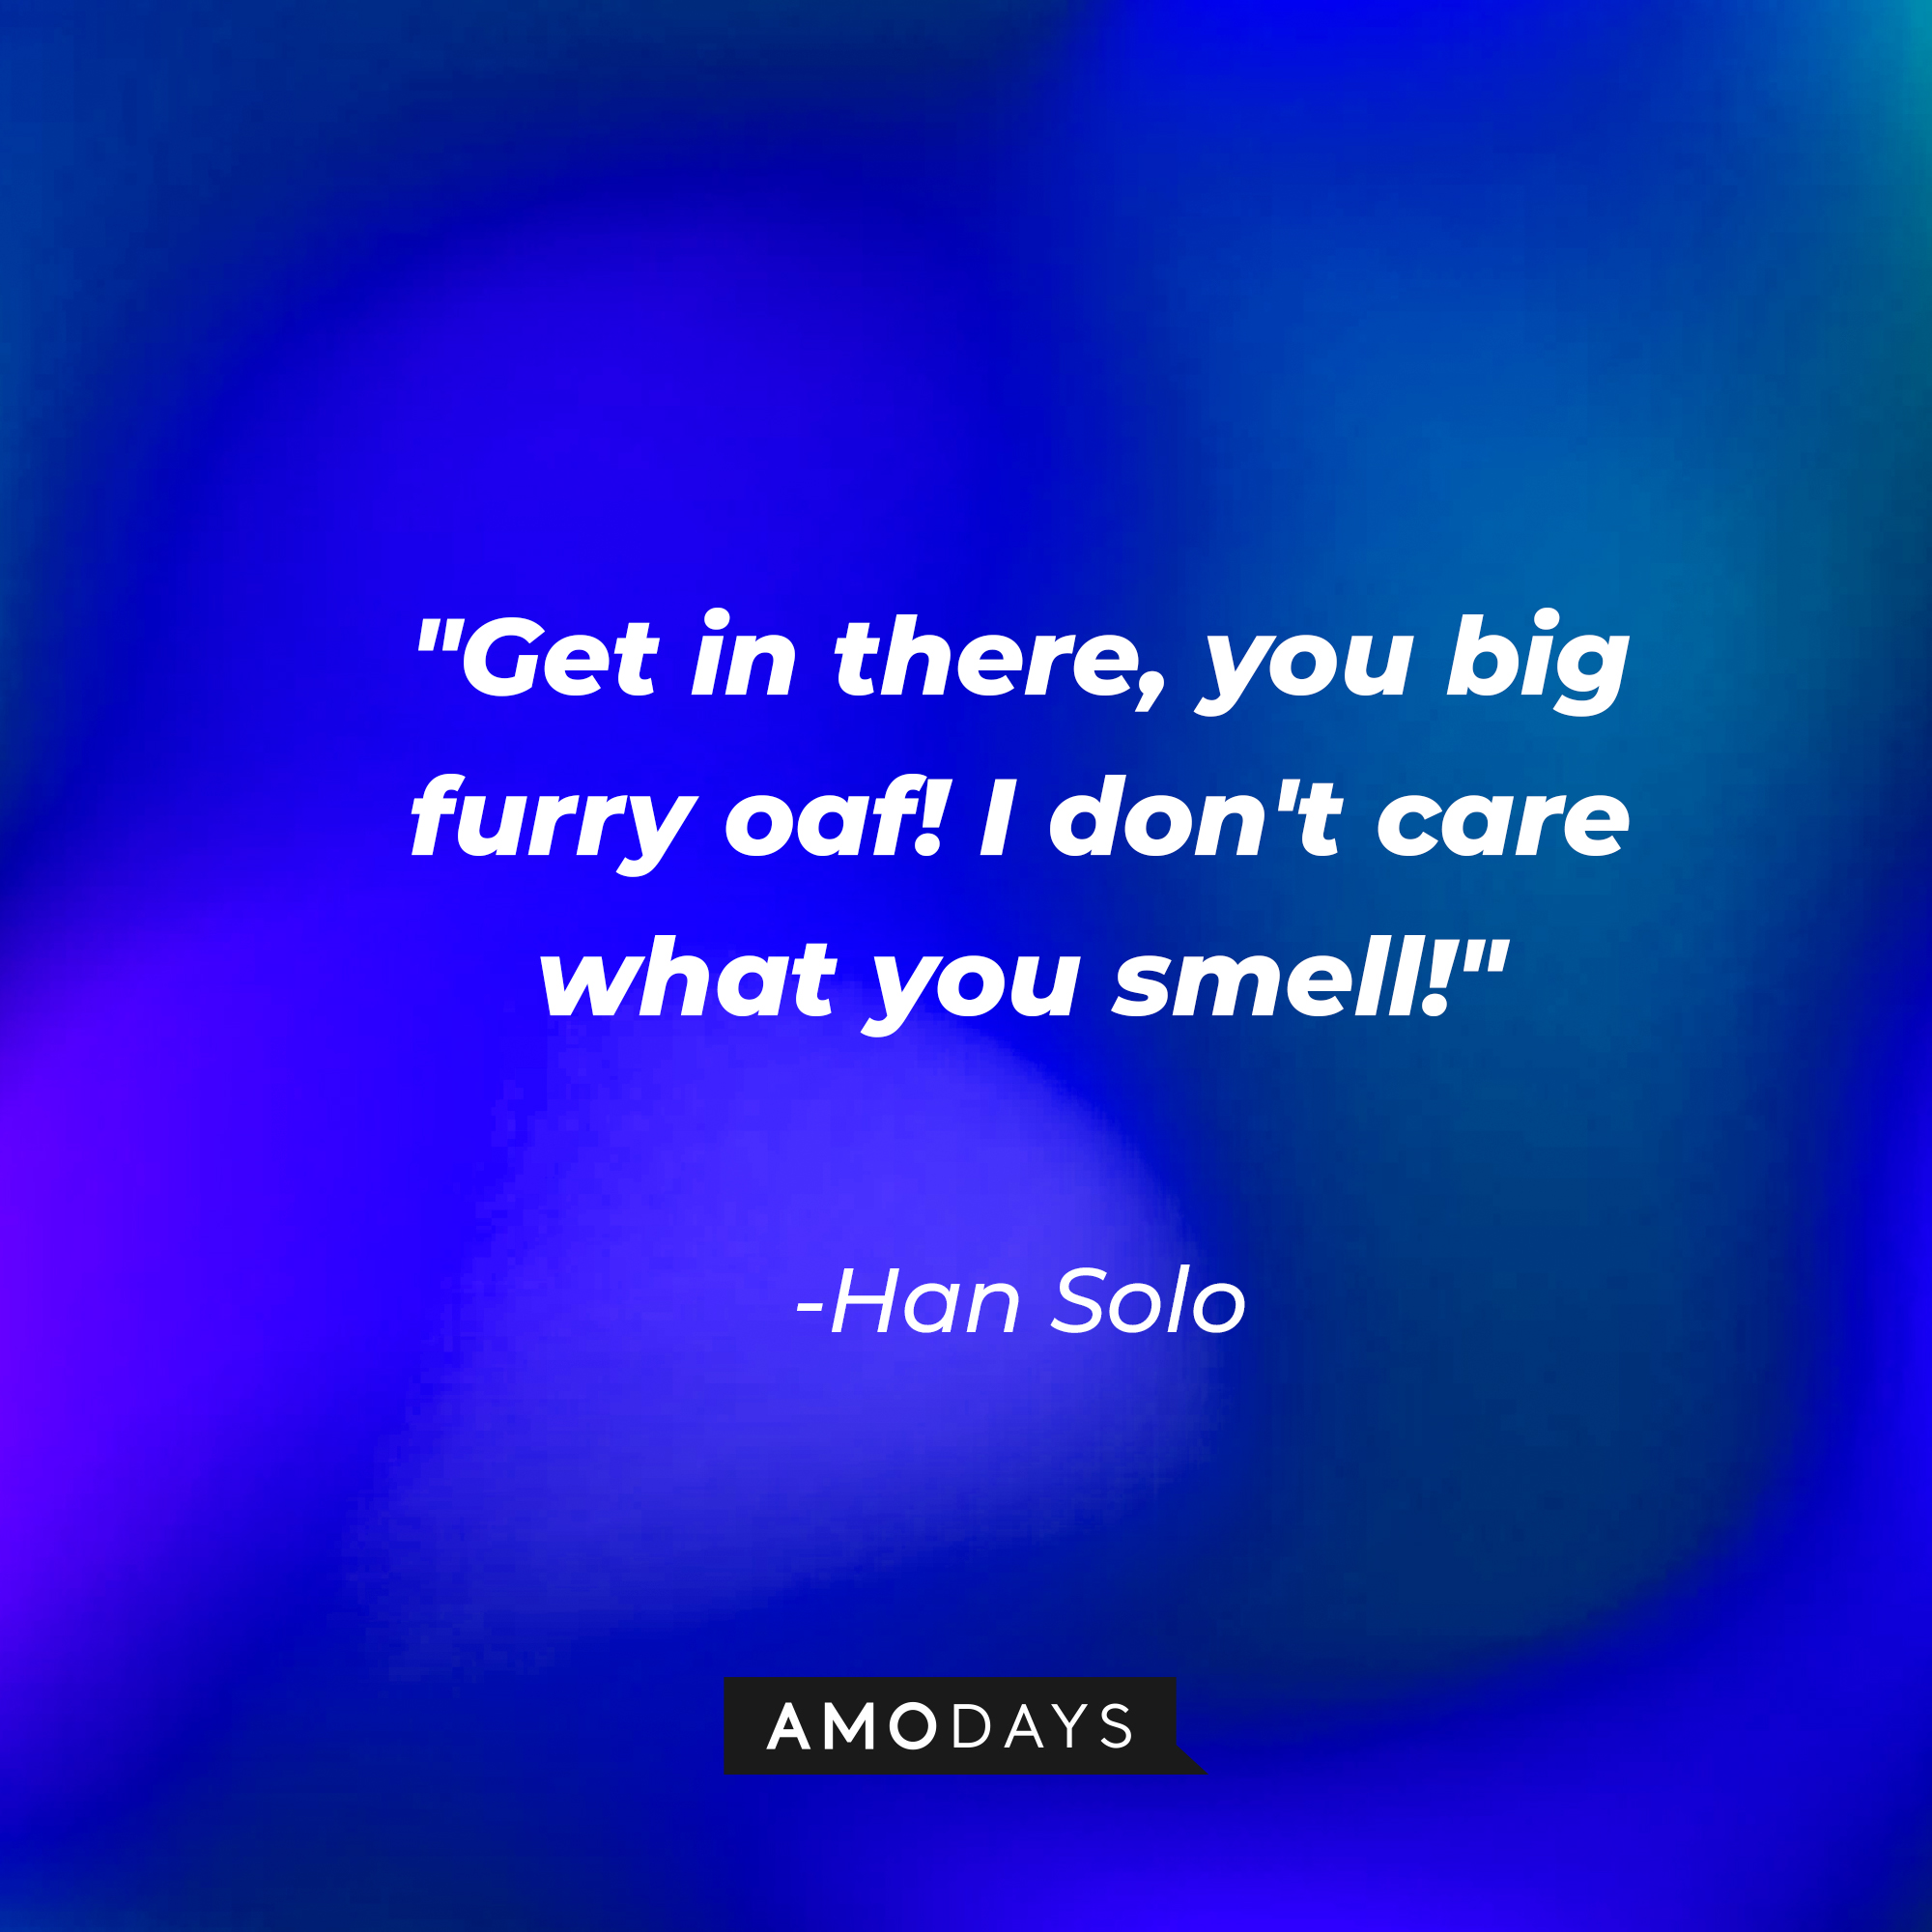 Hans Solo's quote: "Get in there, you big furry oaf! I don't care what you smell!" | Source: AmoDays